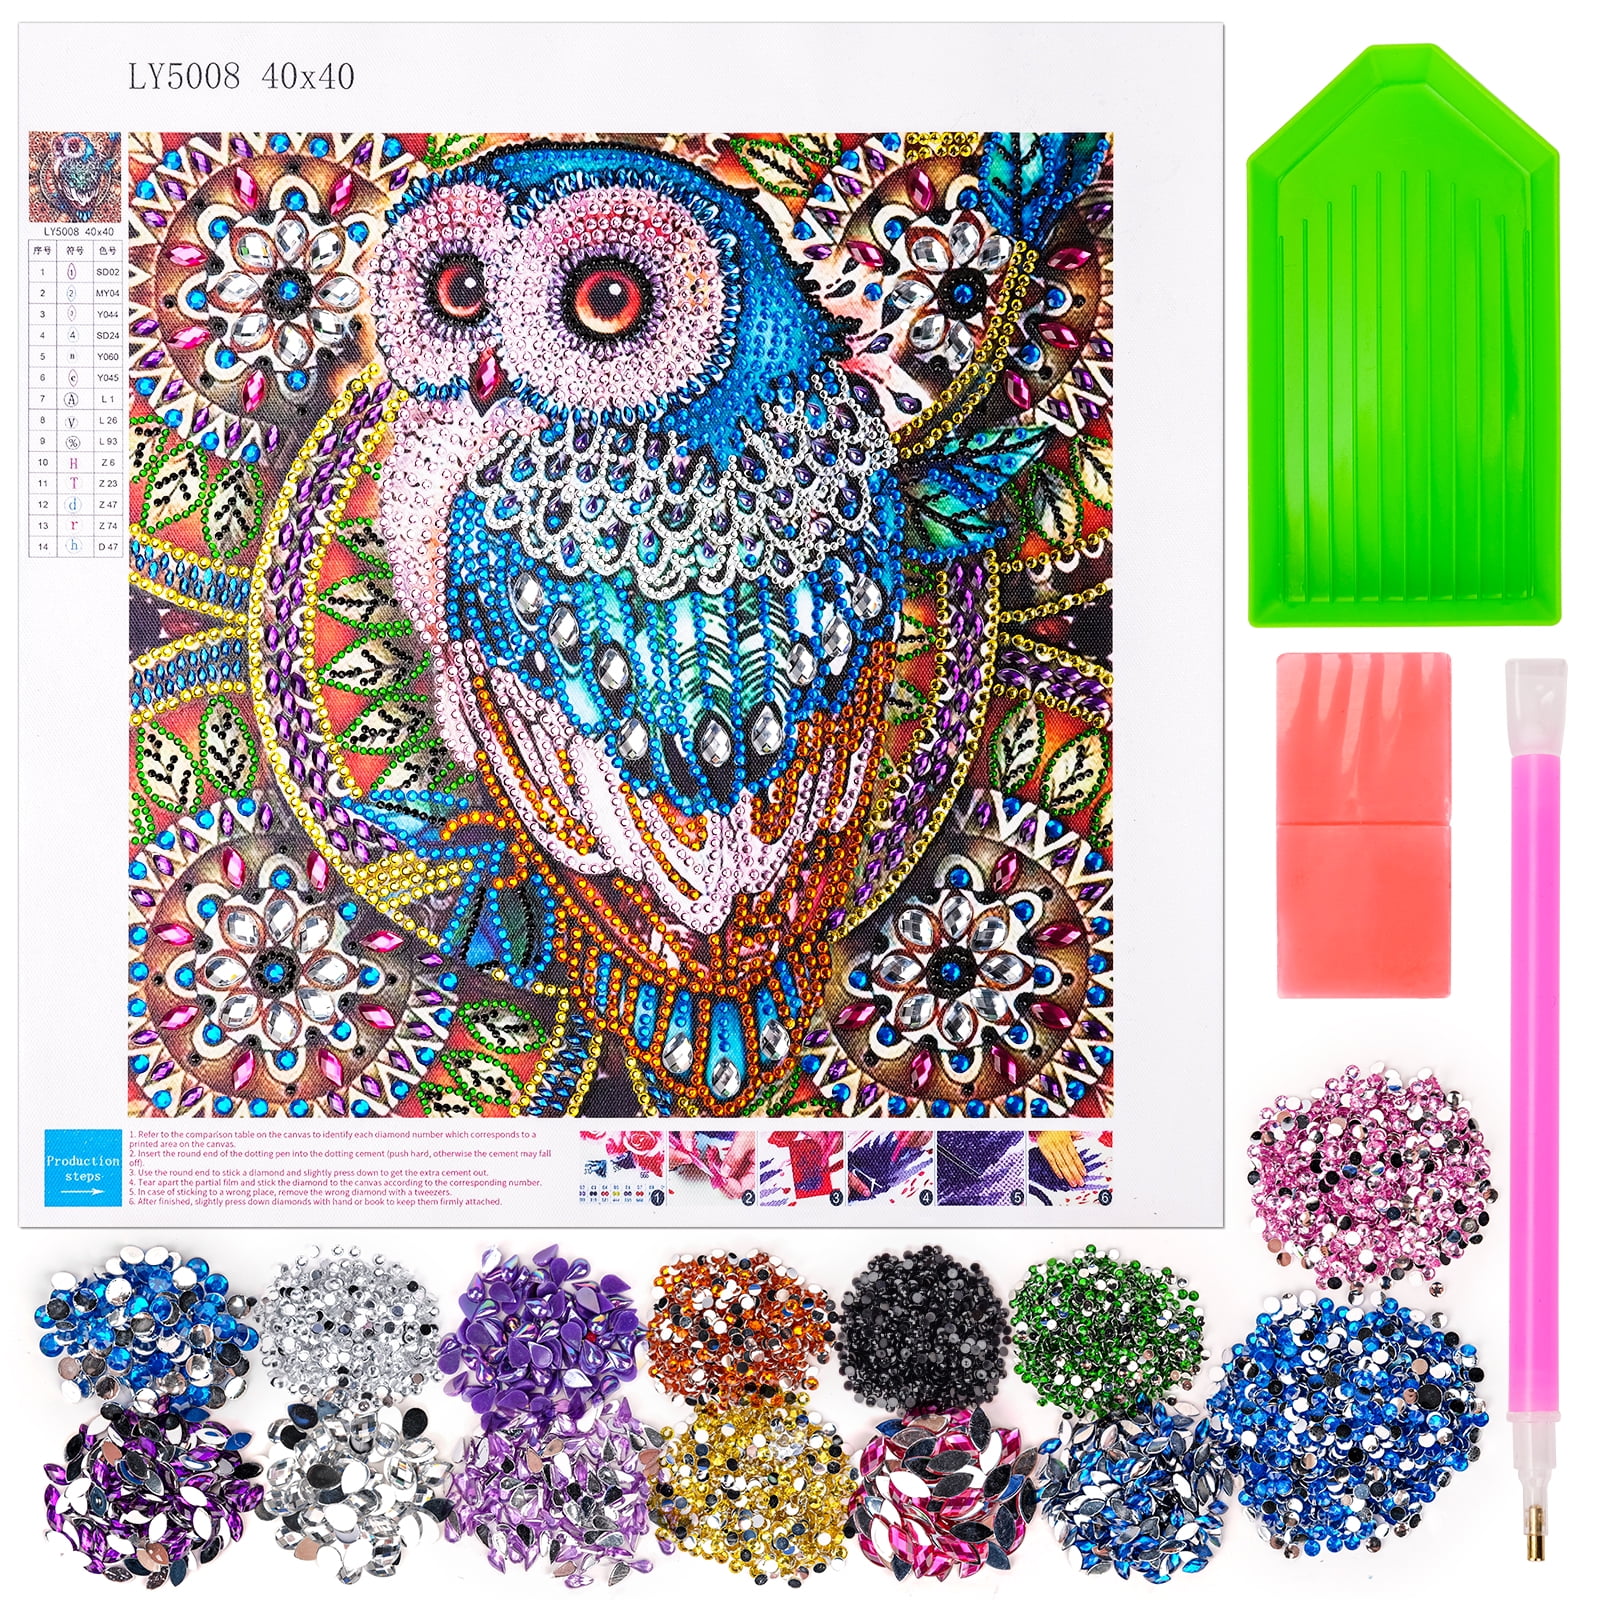 ZALIAFEI Space Cat Diamond Painting Kits for Kids, Diamond Art for Kids  Holiday, Gem Art Kits for Girls Birthday Gift, Arts and Crafts for Kids  Ages 8